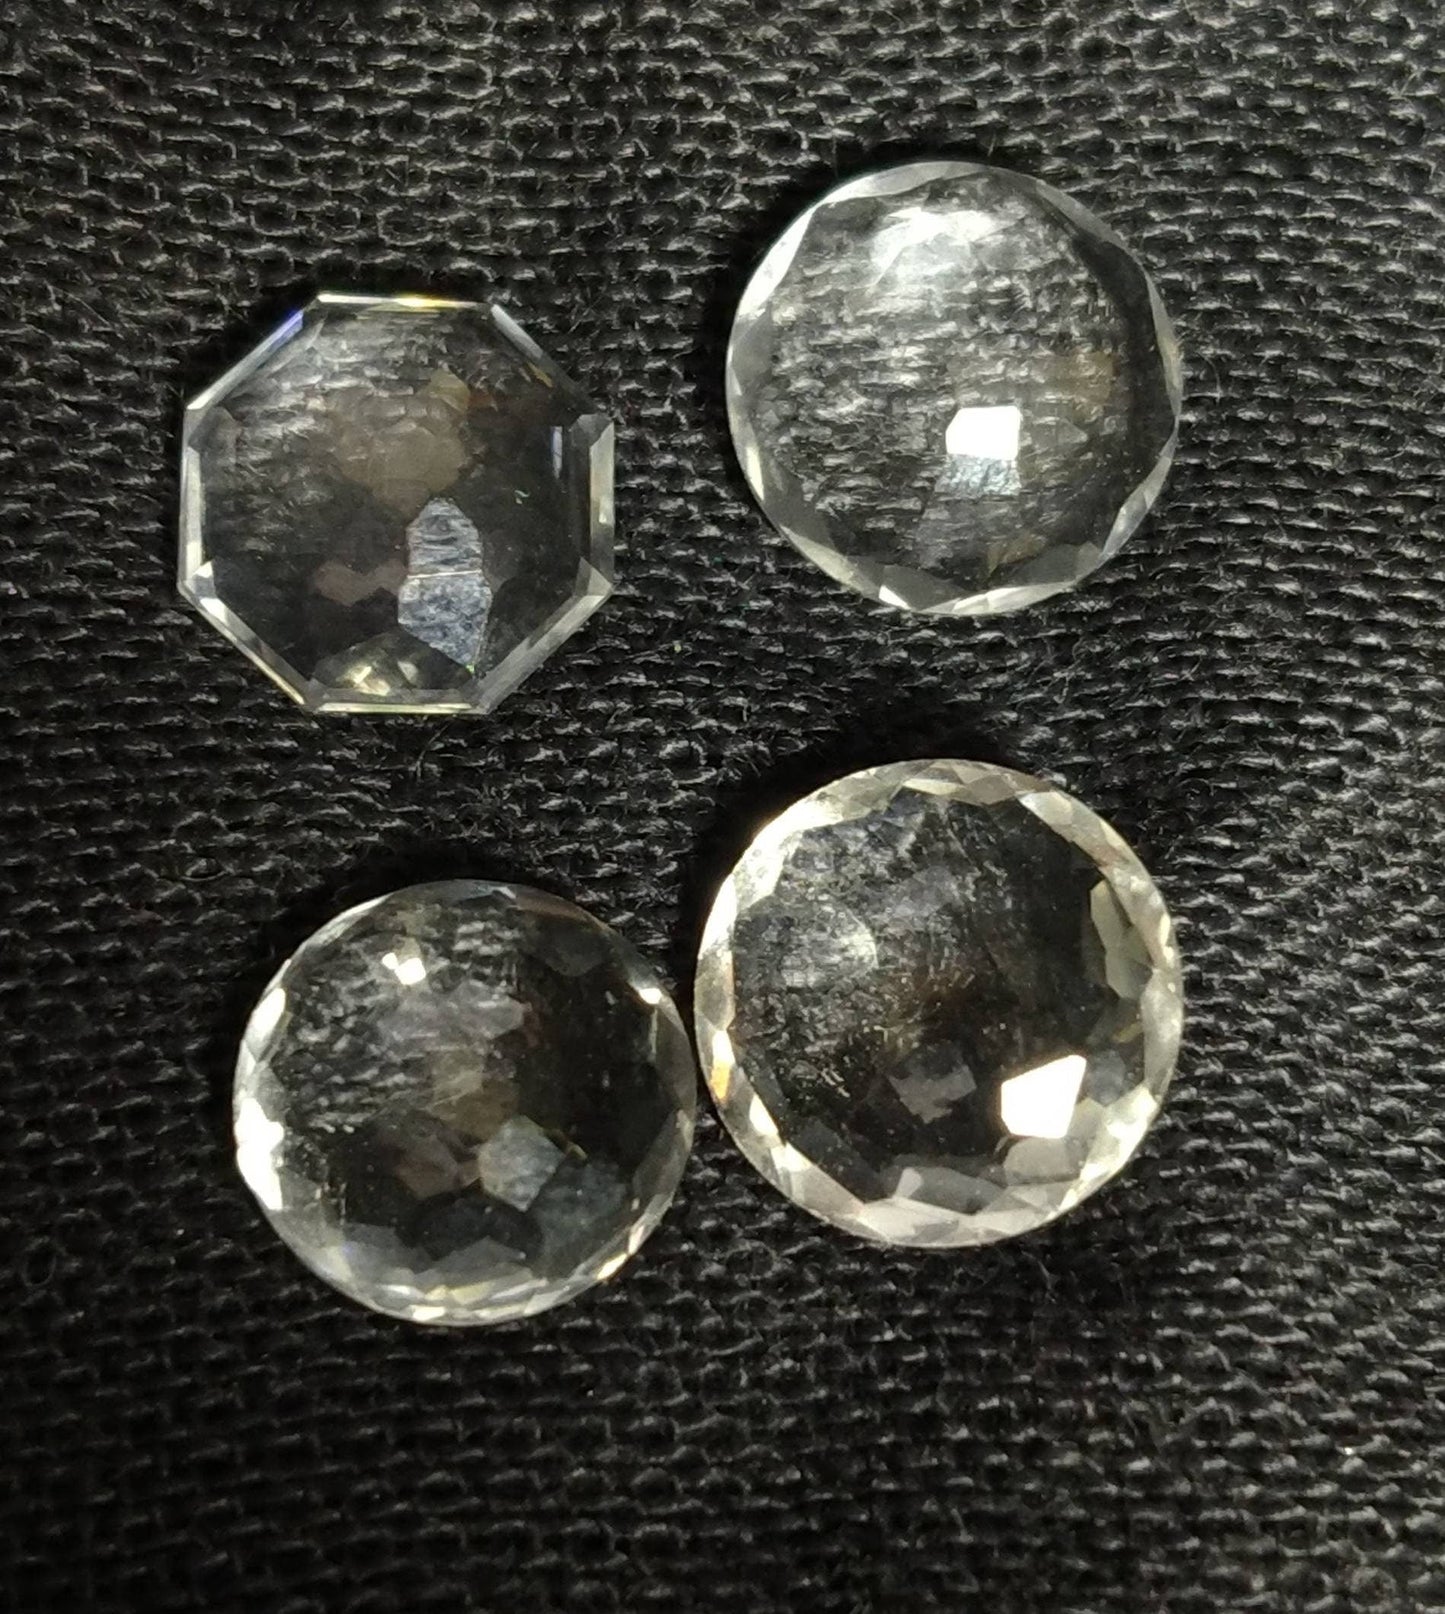 ARSAA GEMS AND MINERALSNatural top quality beautiful 10 carats small set of rose cut Faceted quartz Cabochons - Premium  from ARSAA GEMS AND MINERALS - Just $15.00! Shop now at ARSAA GEMS AND MINERALS